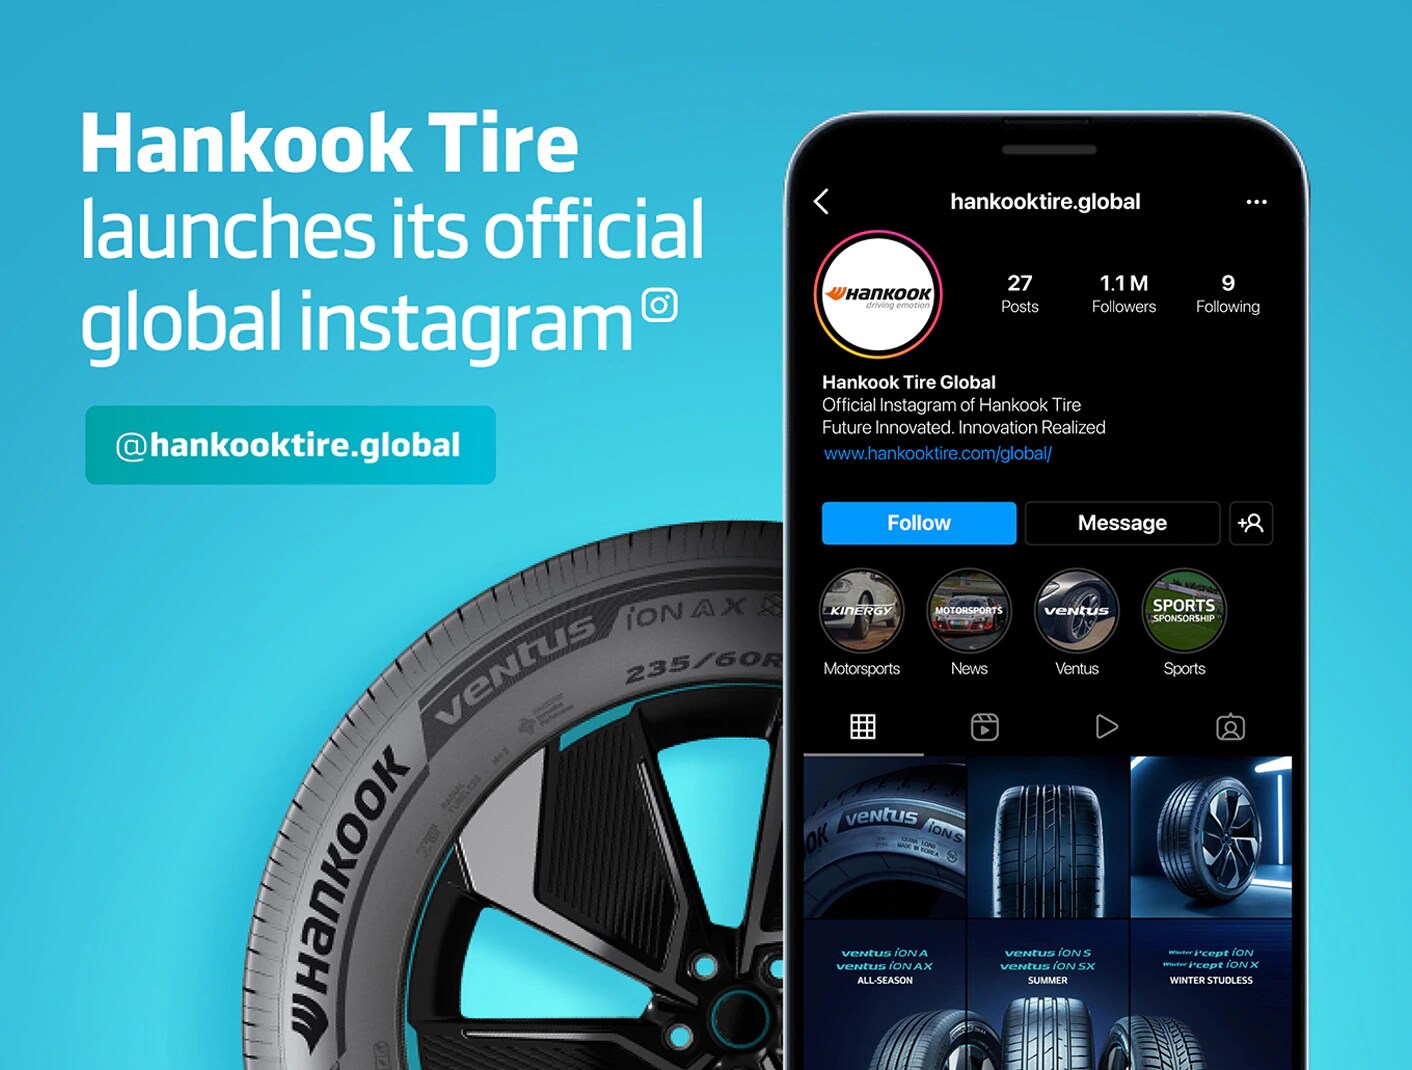 Hankook Tire launches its official global Instagram